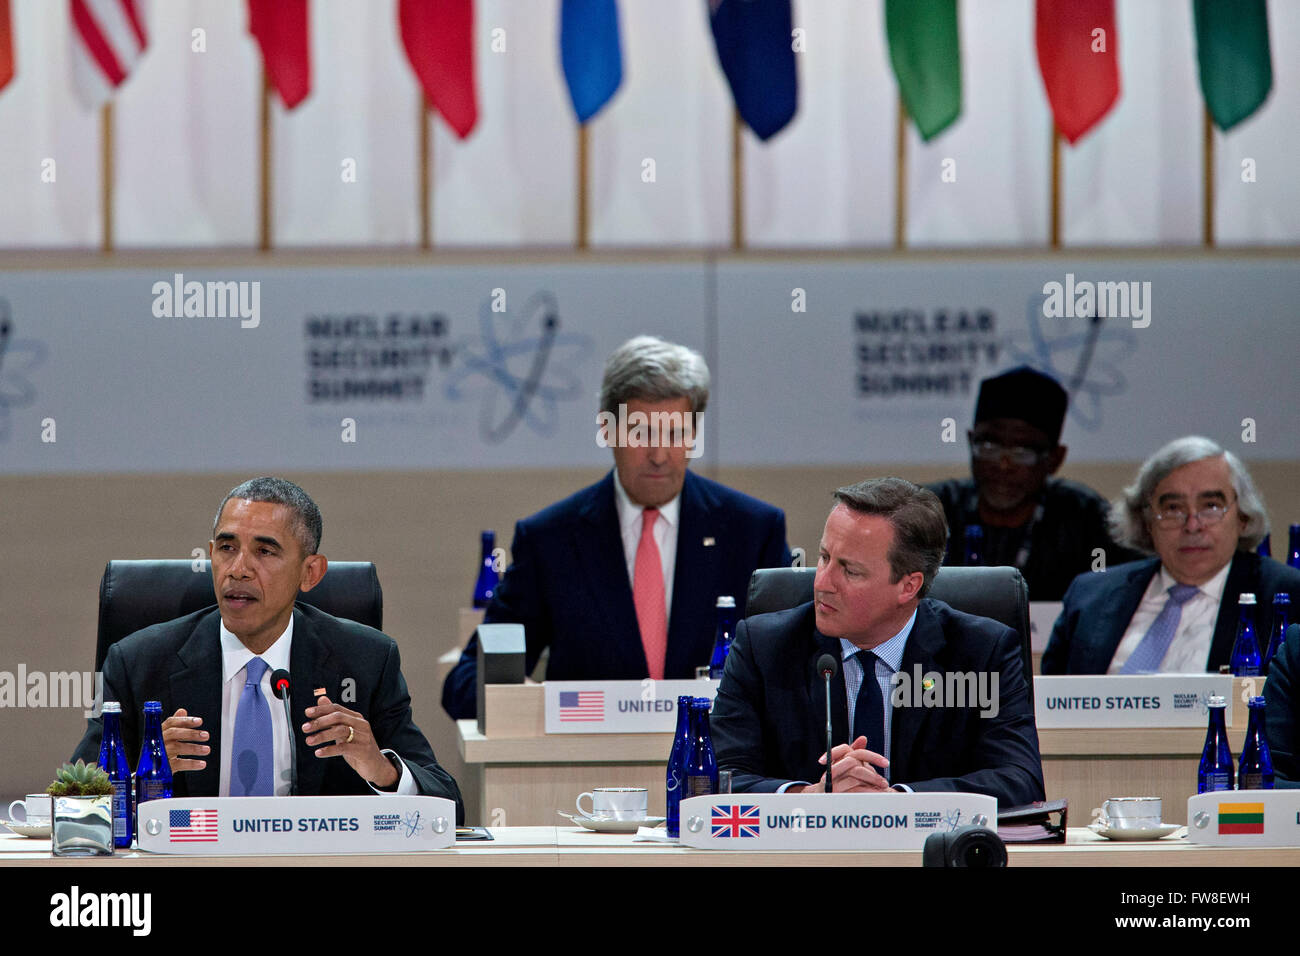 United States President Barack Obama, left, speaks during a closing session with David Cameron, U.K. prime minister, at the Nuclear Security Summit in Washington, DC, U.S., on Friday, April 1, 2016. After a spate of terrorist attacks from Europe to Africa, Obama is rallying international support during the summit for an effort to keep Islamic State and similar groups from obtaining nuclear material and other weapons of mass destruction. Seated behind them are US Secretary of State John Kerry and US Secretary of Energy Ernest Moniz. Credit: Andrew Harrer/Pool via CNP - NO WIRE SERVICE - Stock Photo